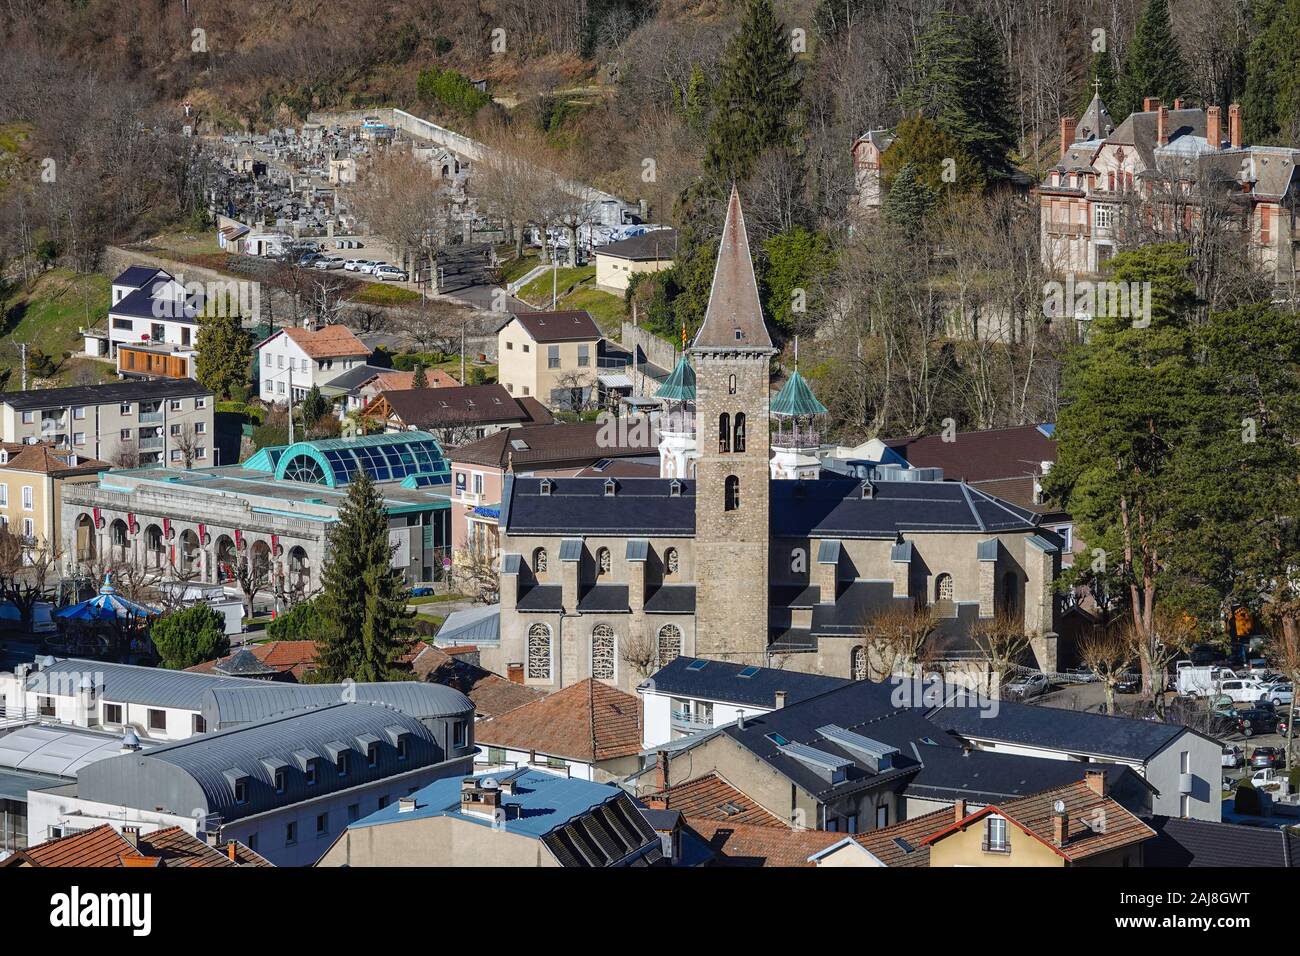 Church and spa, rooftops and buildings at Ax-les-Thermes, Ariege, French Pyrenees, France Stock Photo